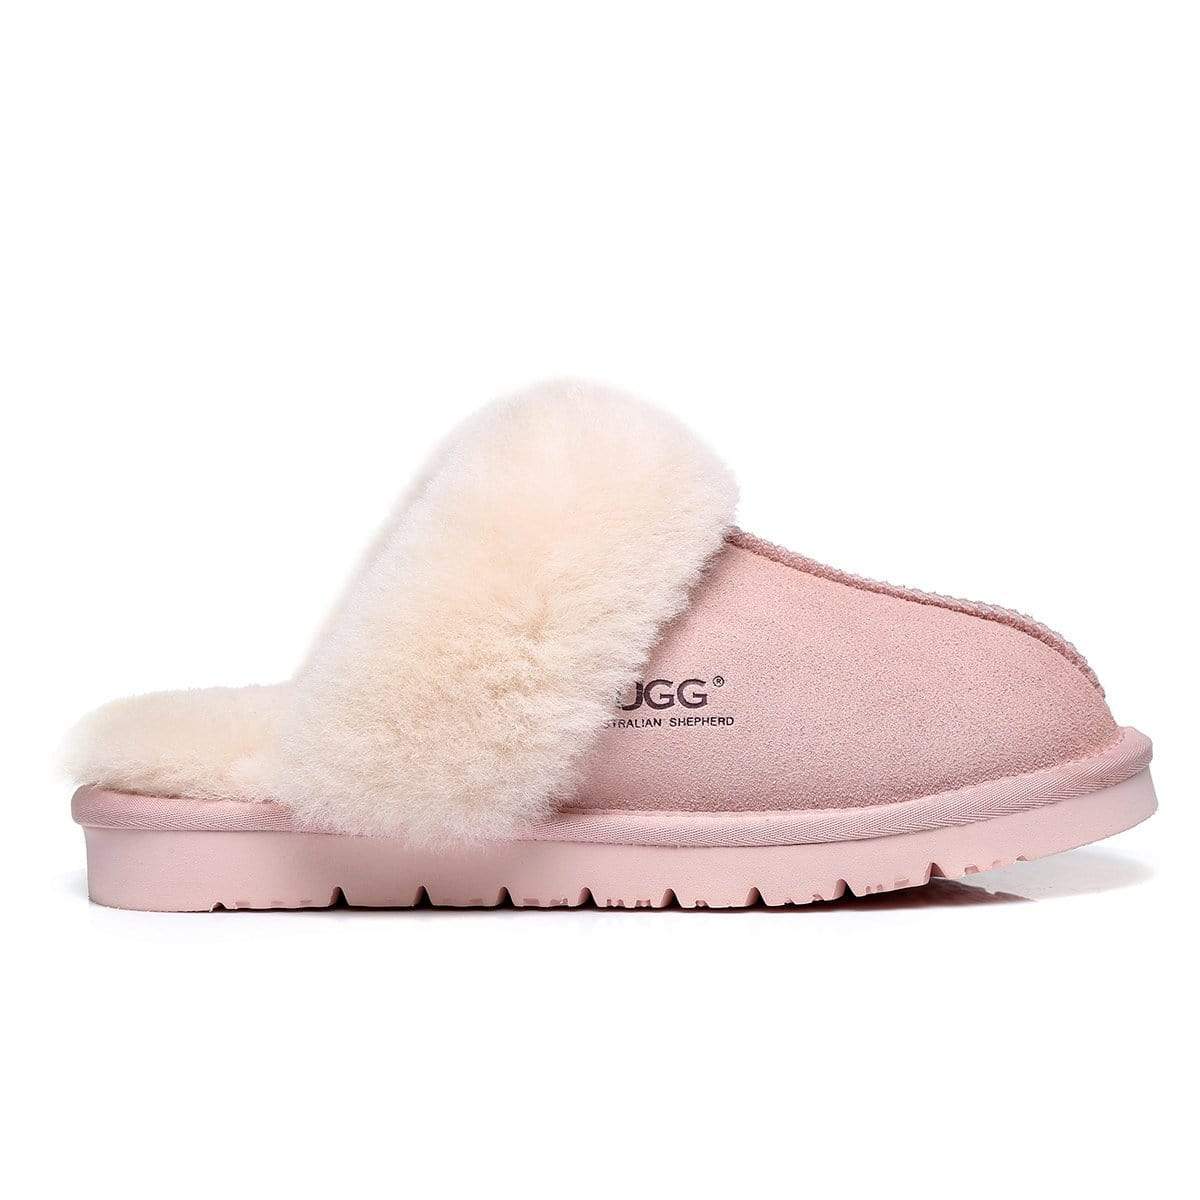 Ultra Sole UGG Slippers